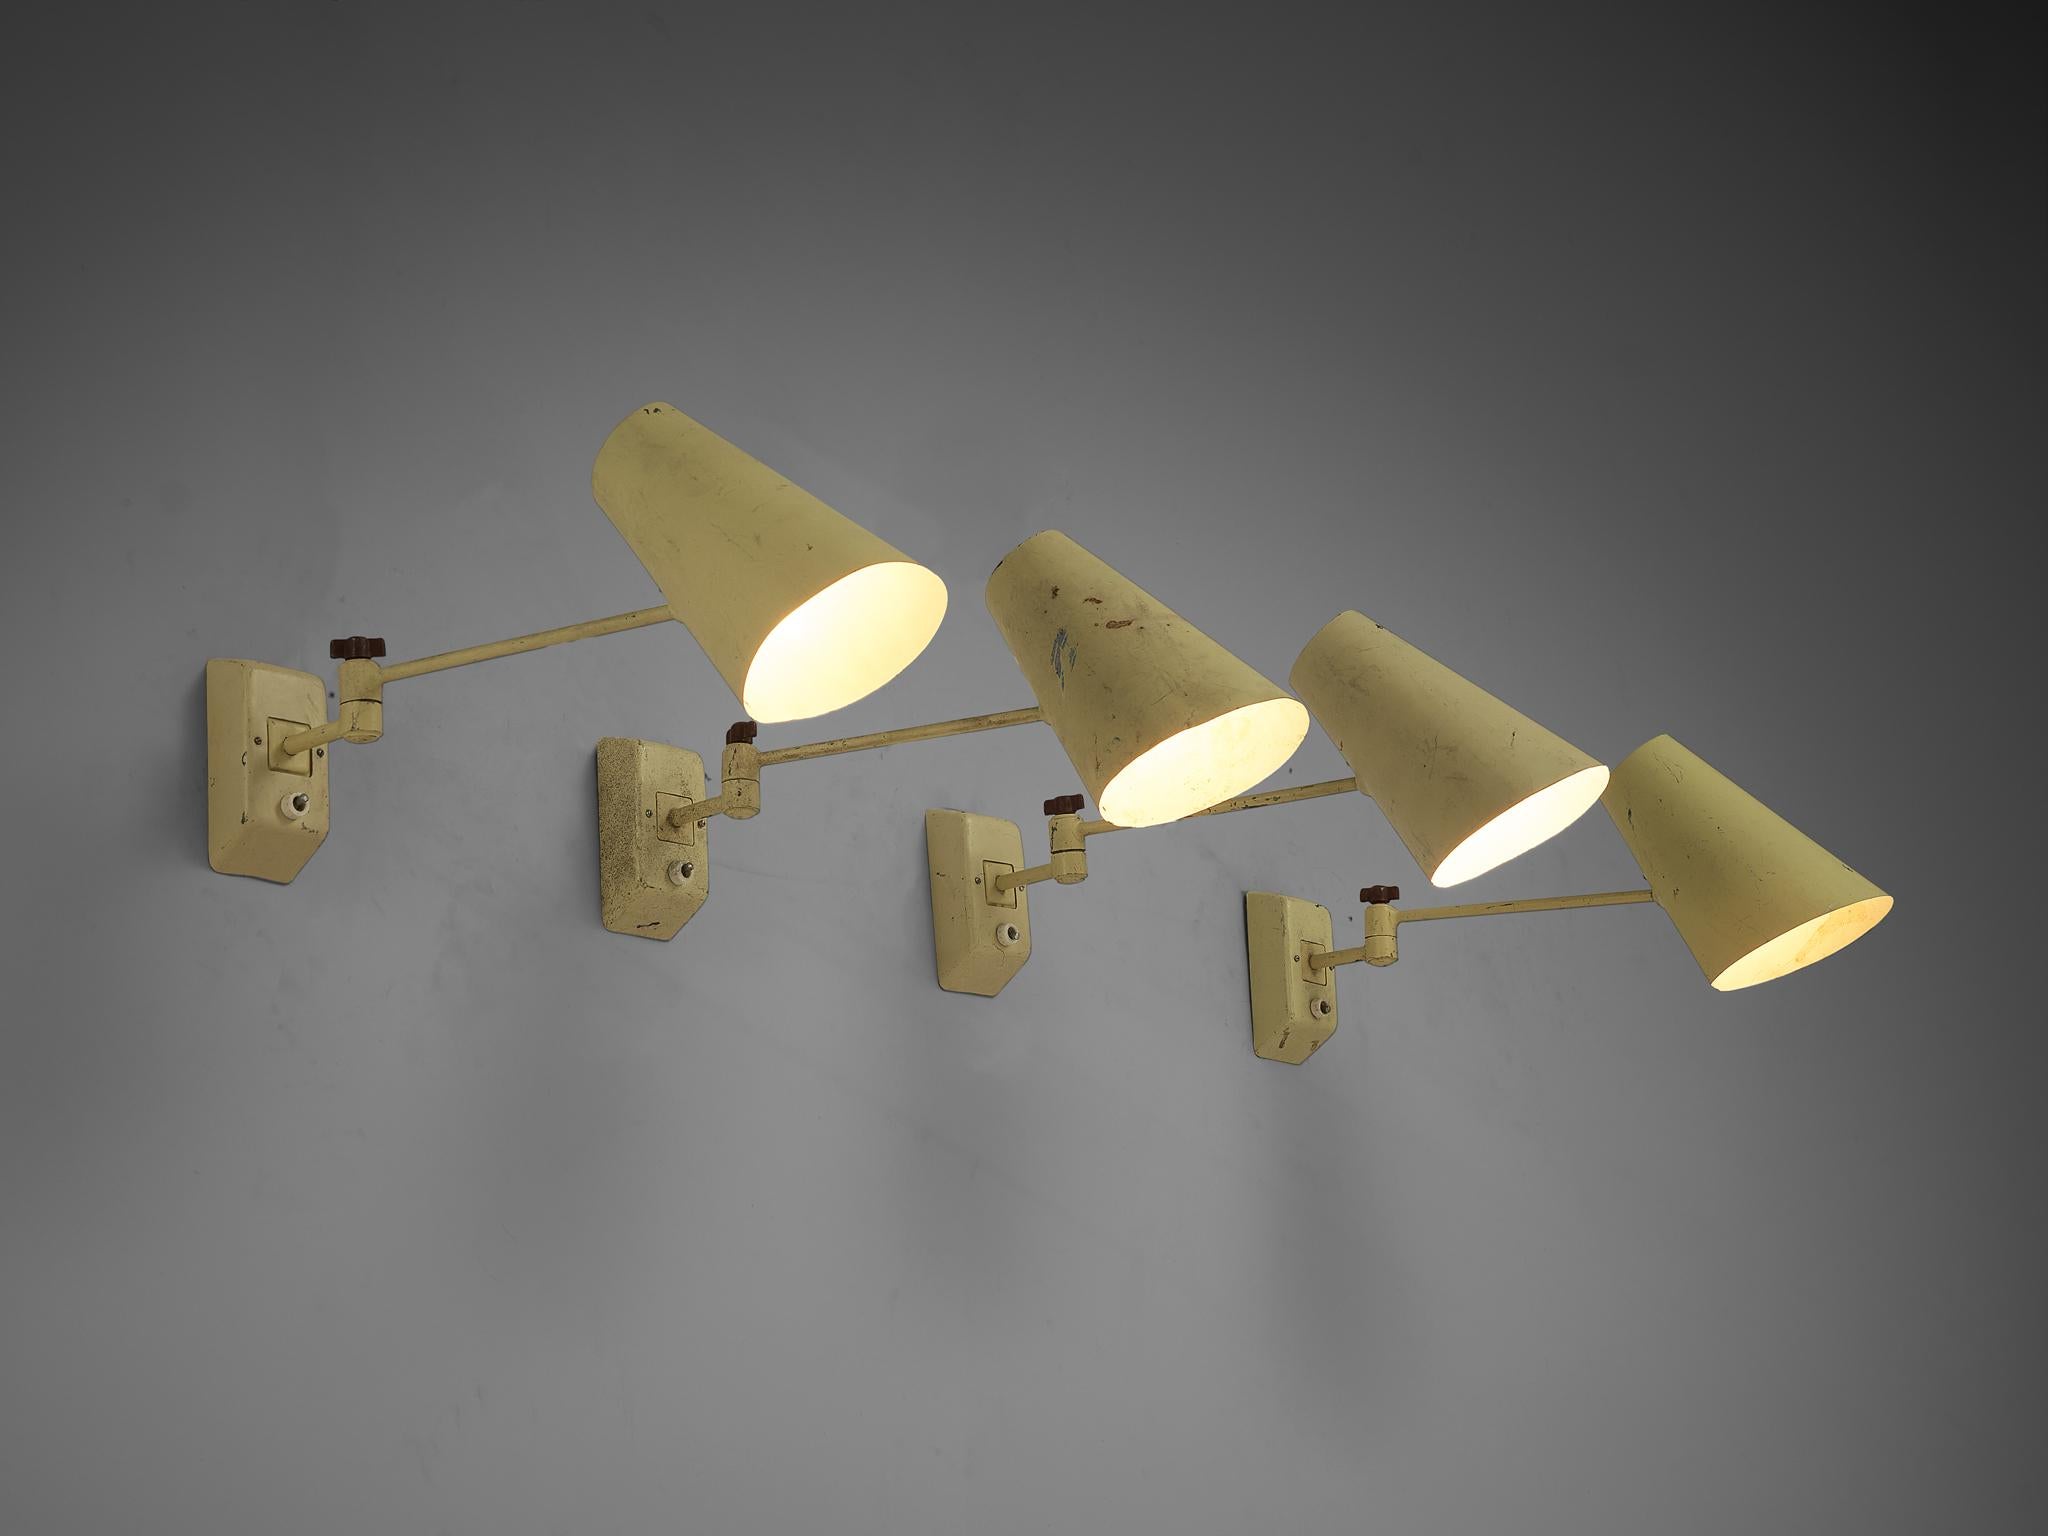 Wall lights, lacquered metal, Europe, 1950s

Simple and modest mid century wall lights in pale yellow. These lights are made in lacquered metal with adjustable rods and shades. The base of the lamps is attached to the wall and the light switch is